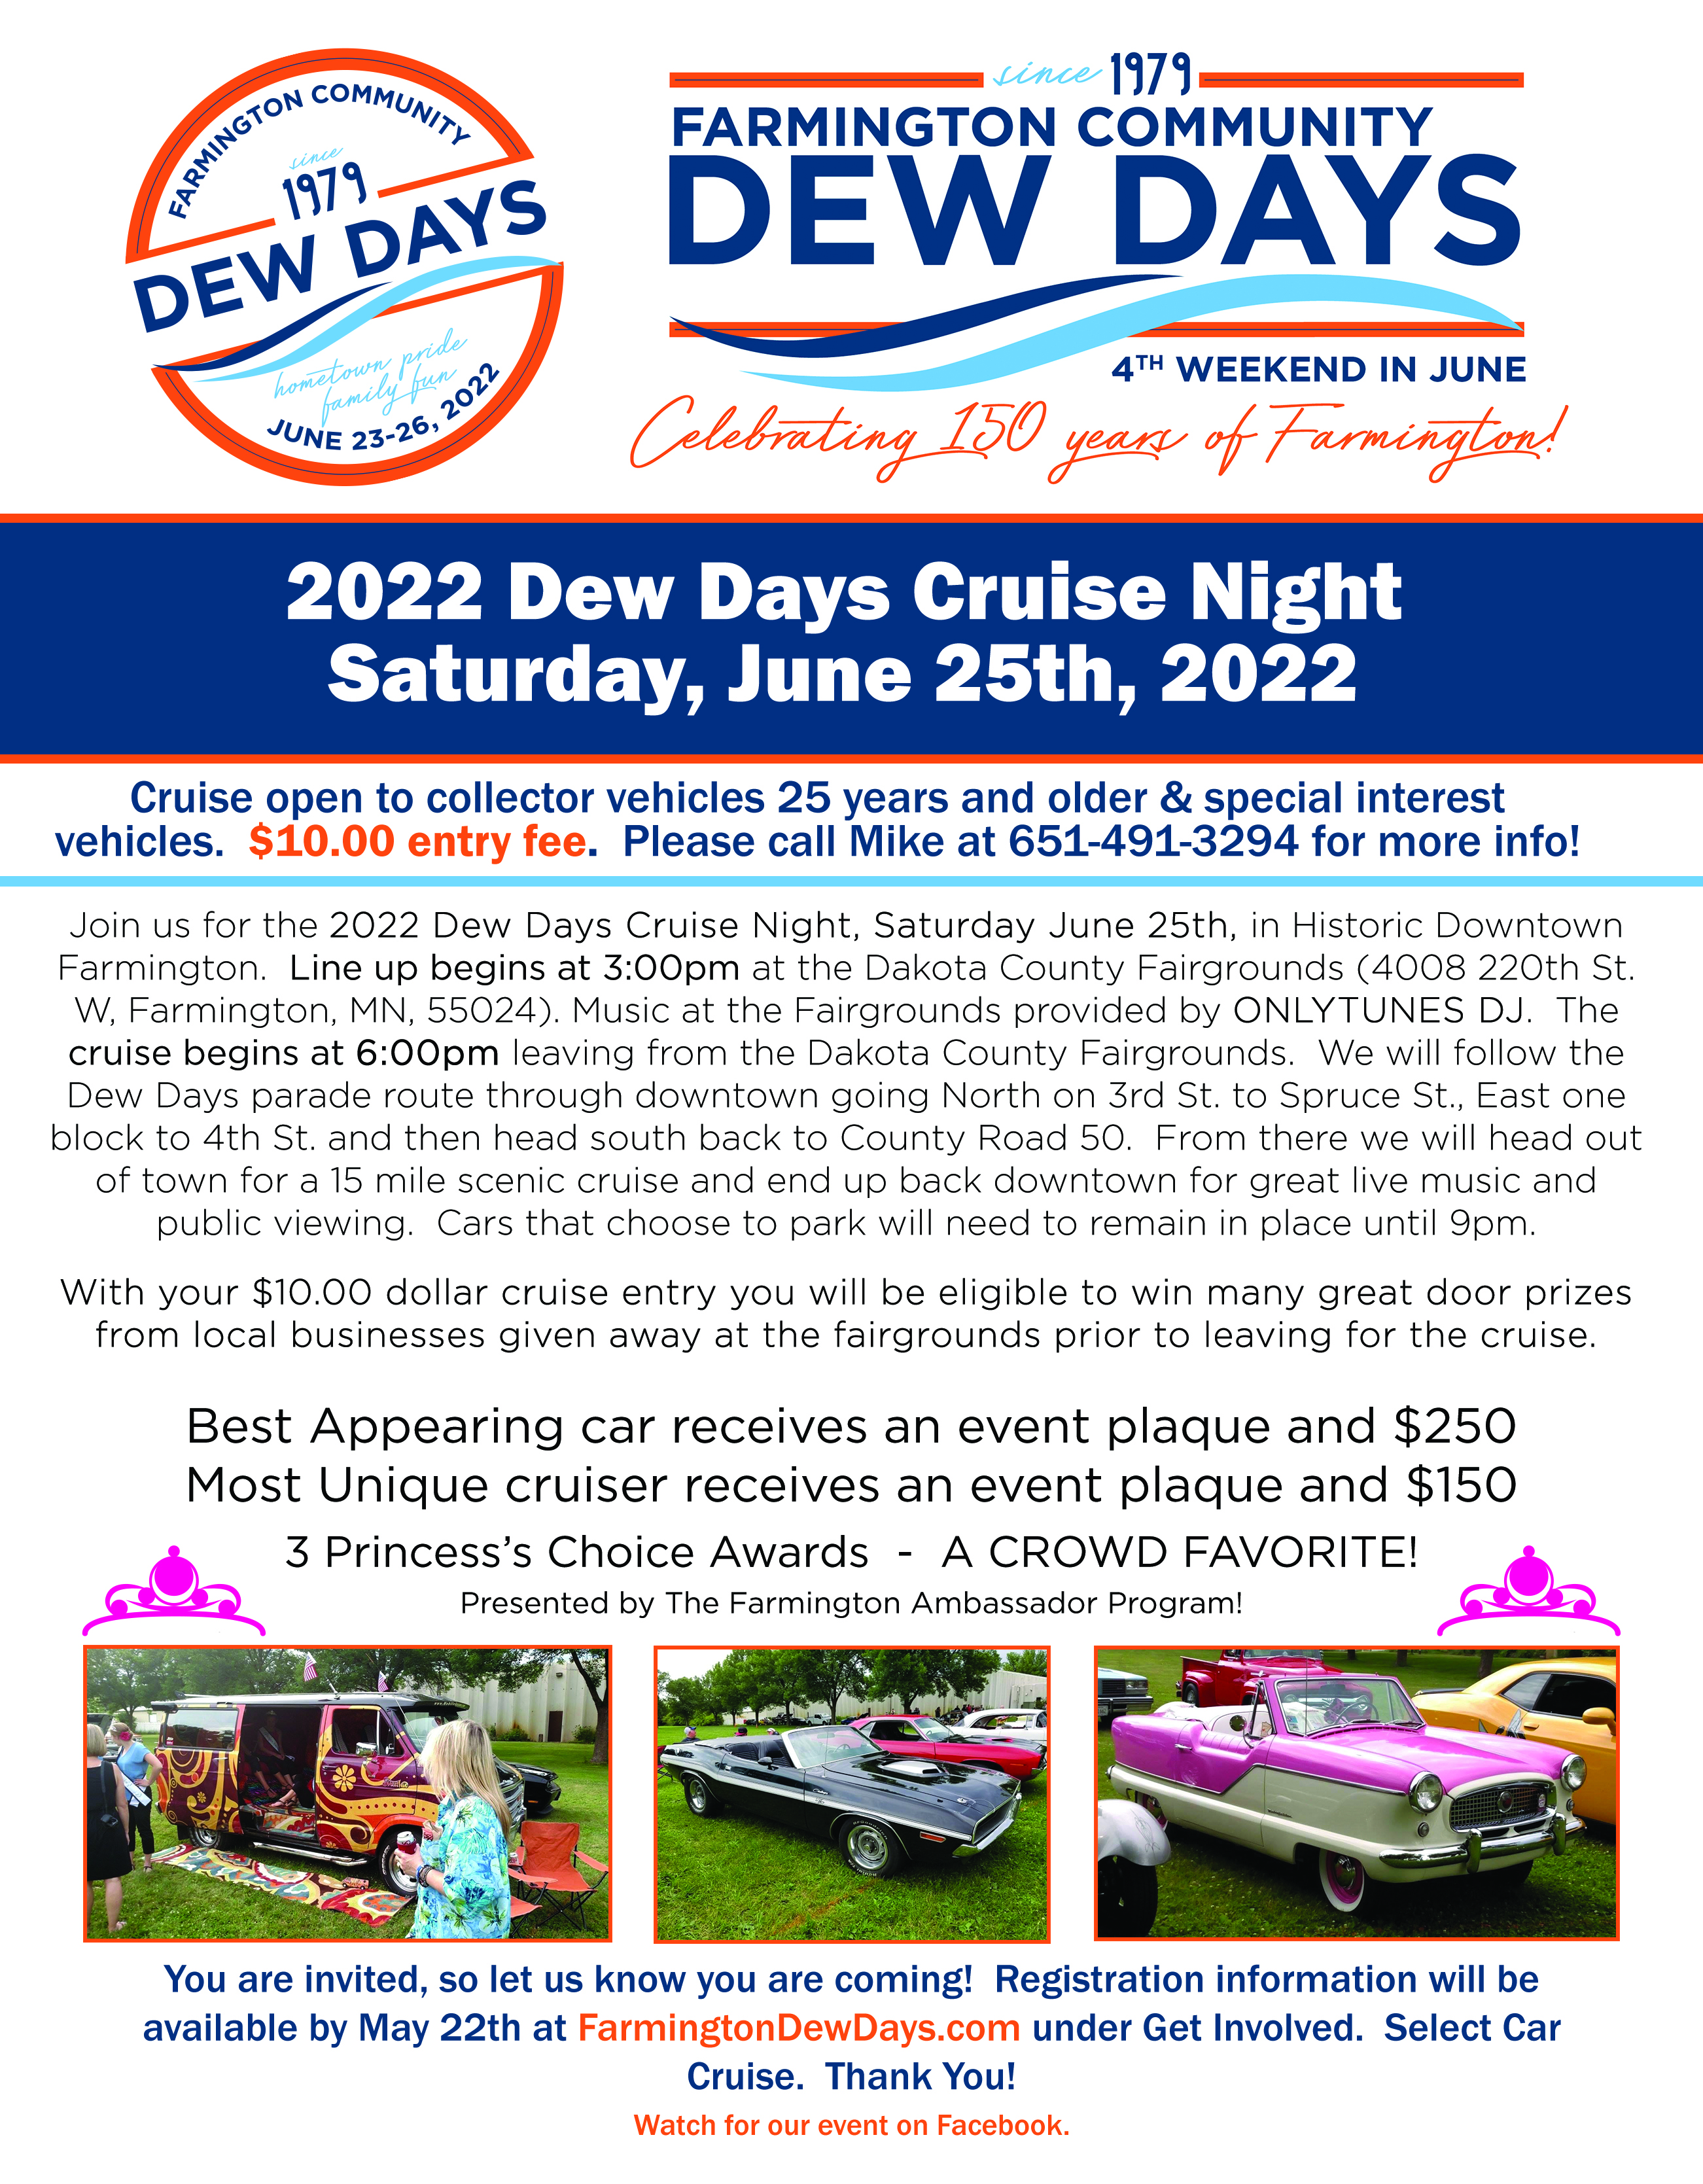 Car Cruise and Show Flyer